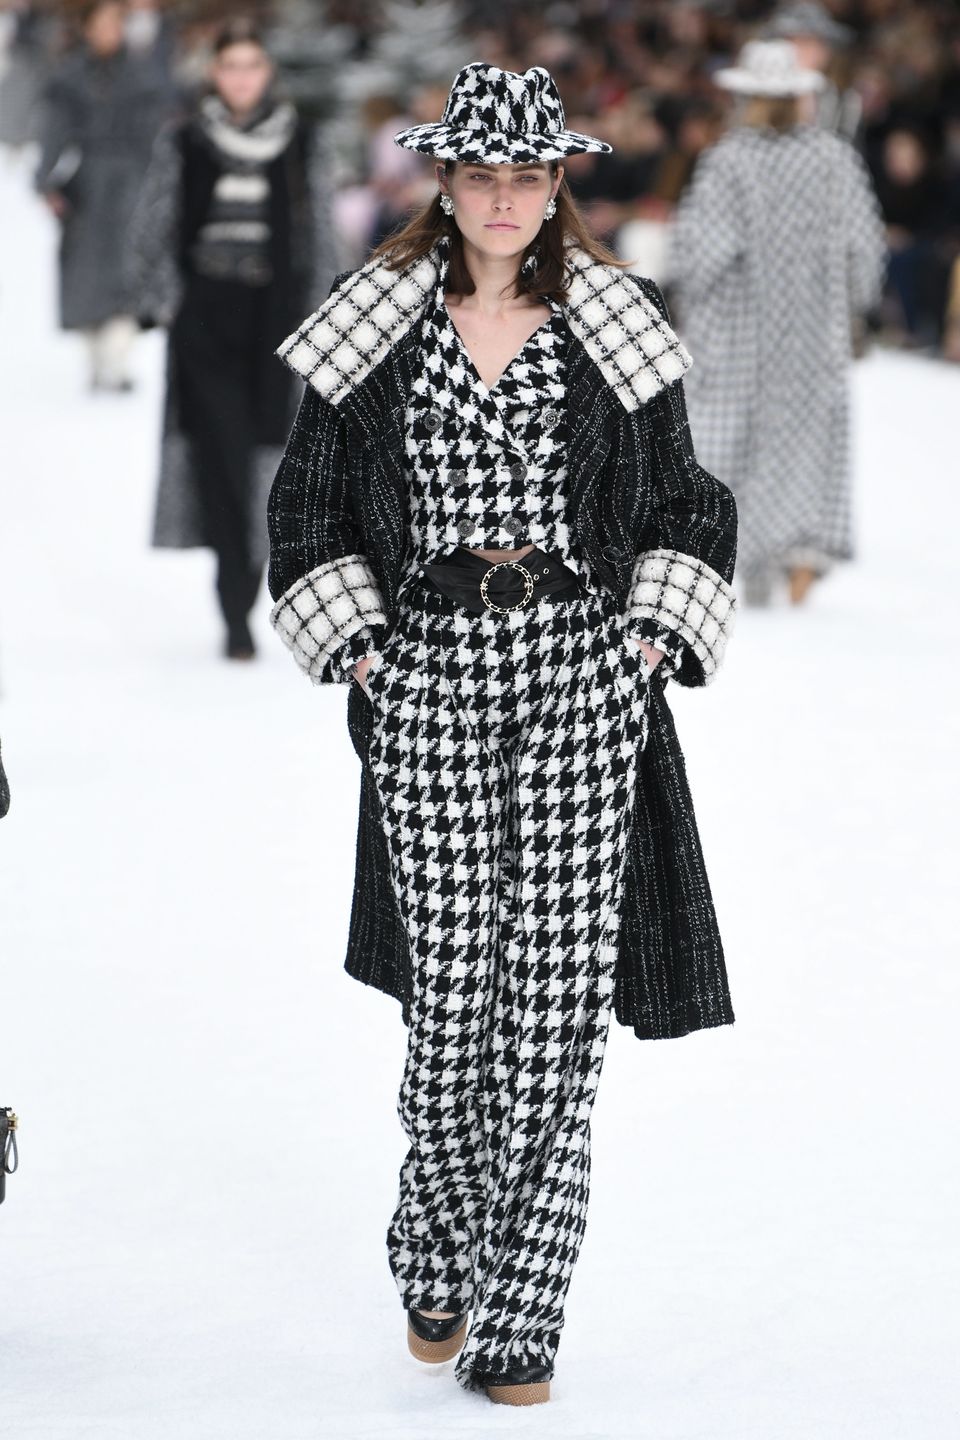 Chanel F/W 2013/14 collection released in Paris, <!-- ab 17046069 -->Fashion<!--  ae 17046069 -->